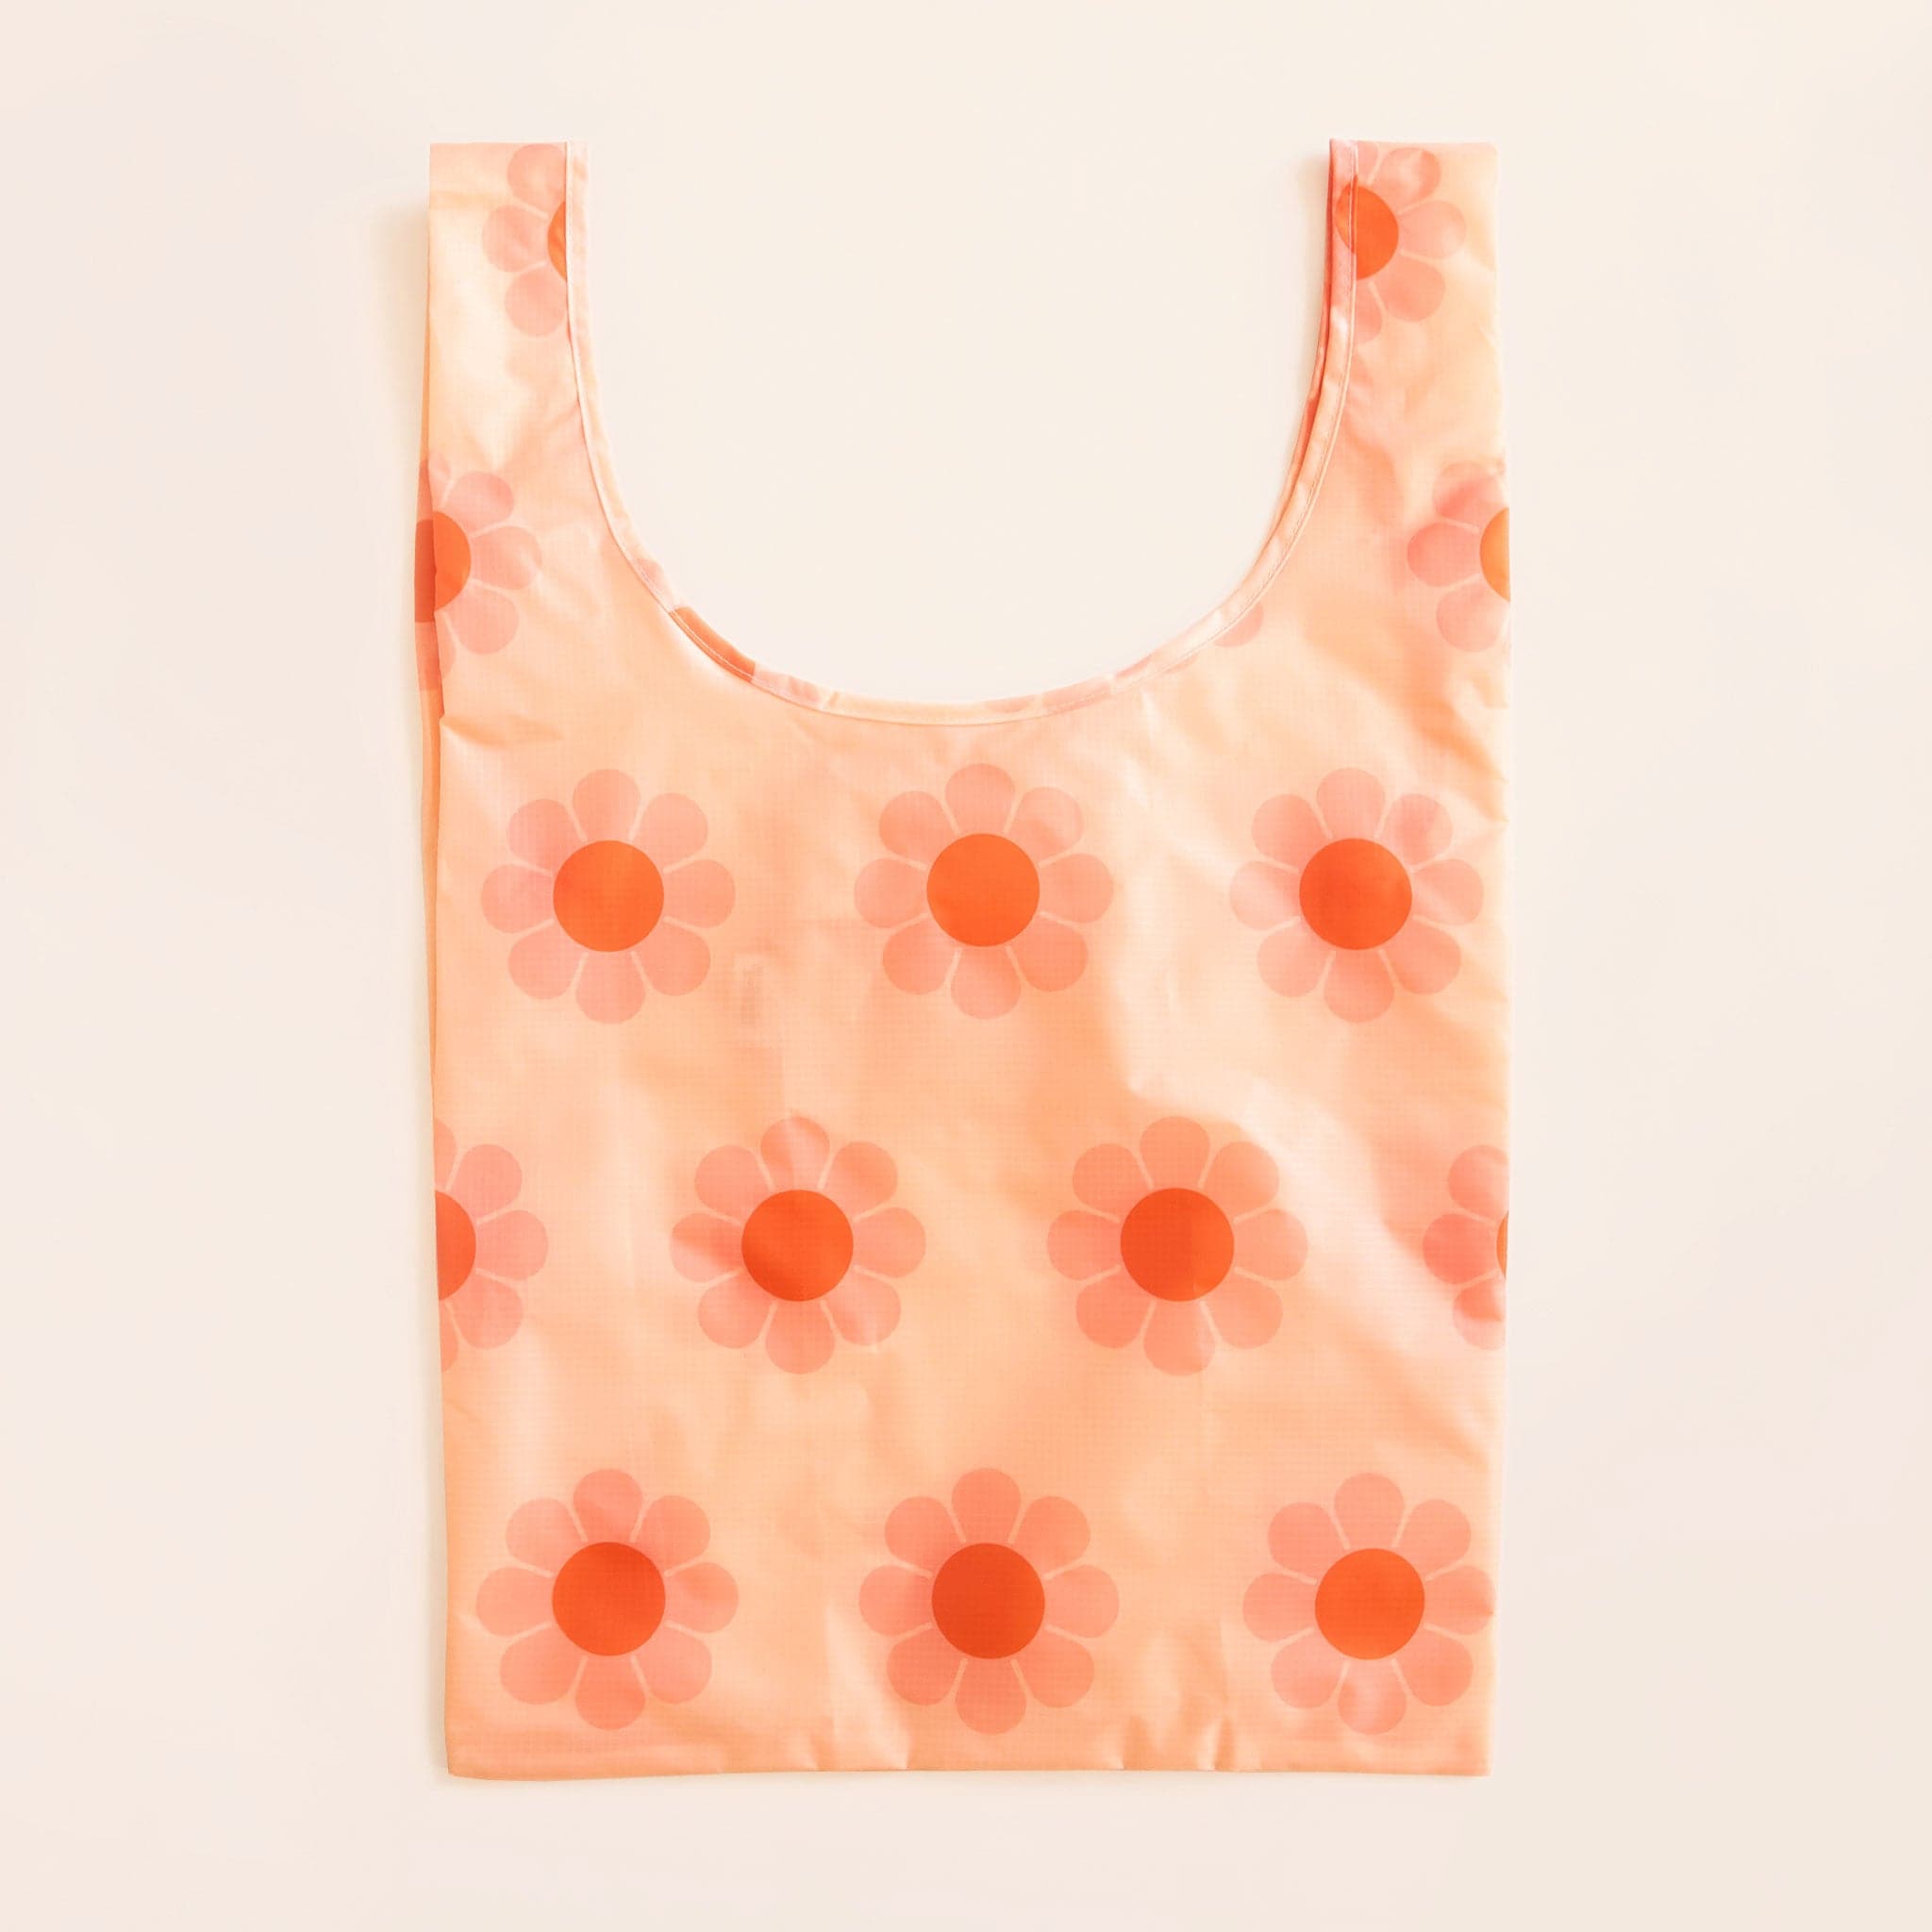 Peach reusable bag filled with a pattern of flowers with pink petals and red-orange centers. The bag is positioned flat on a table and has a &#39;U&#39; shape between two handles.